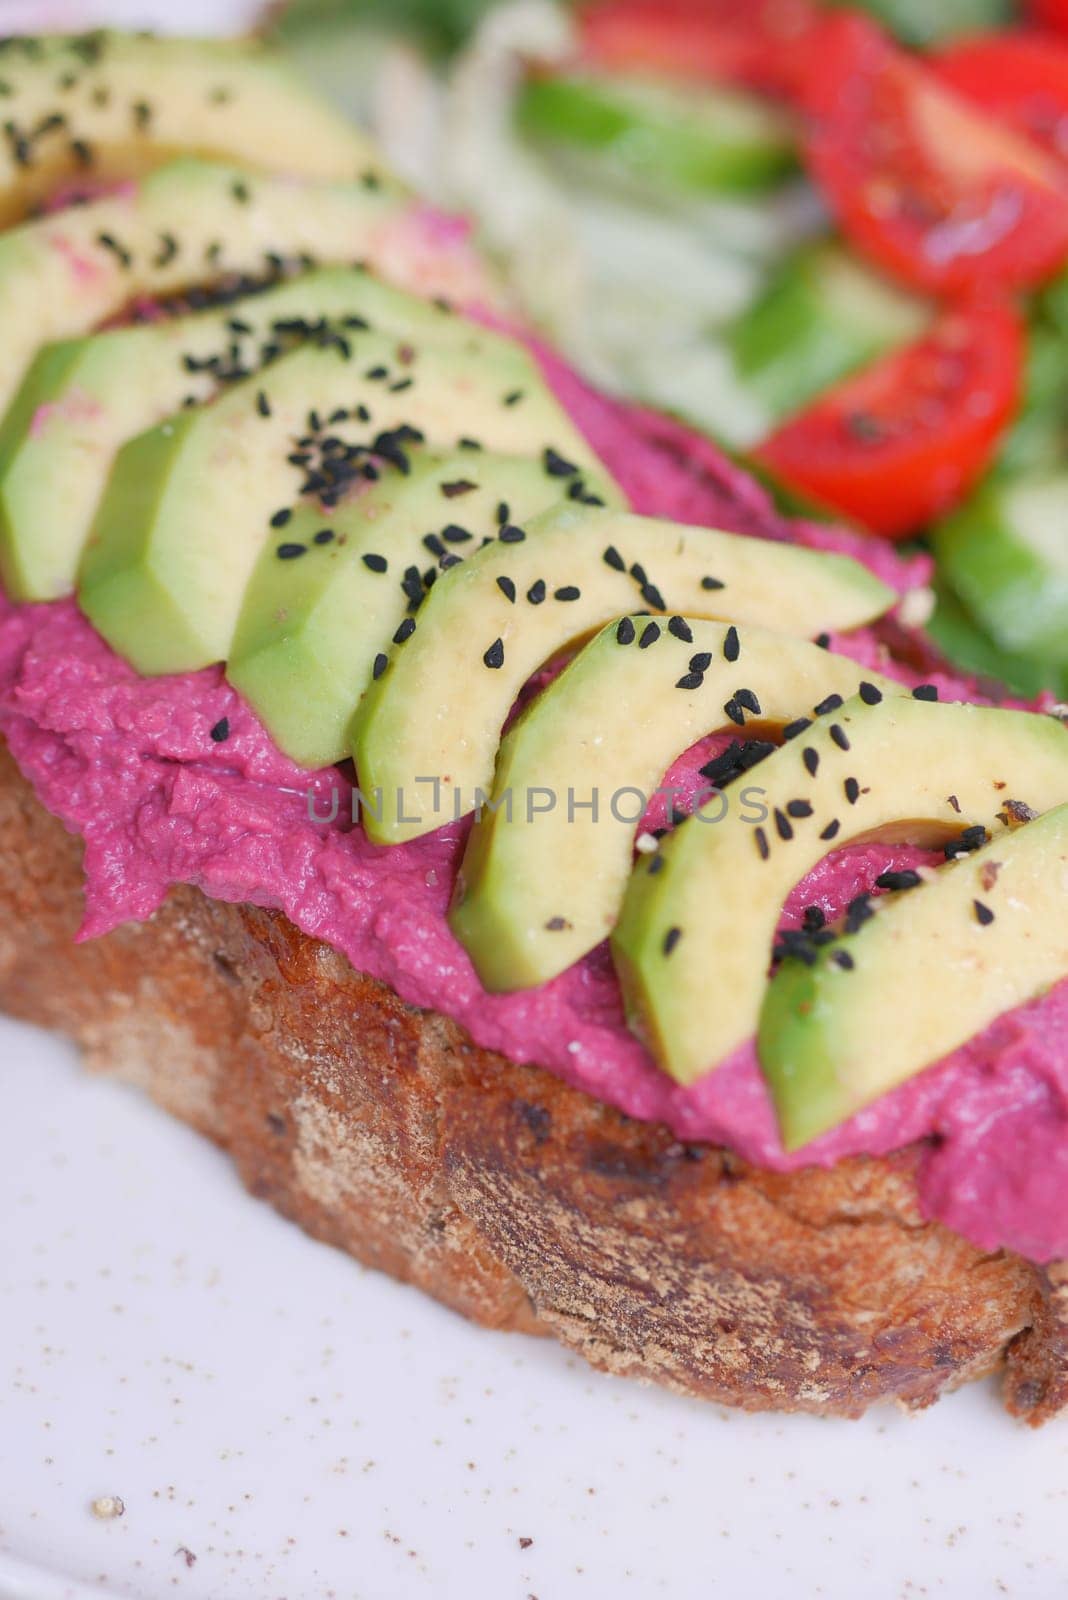 sandwich with avocado and hummus on plate by towfiq007